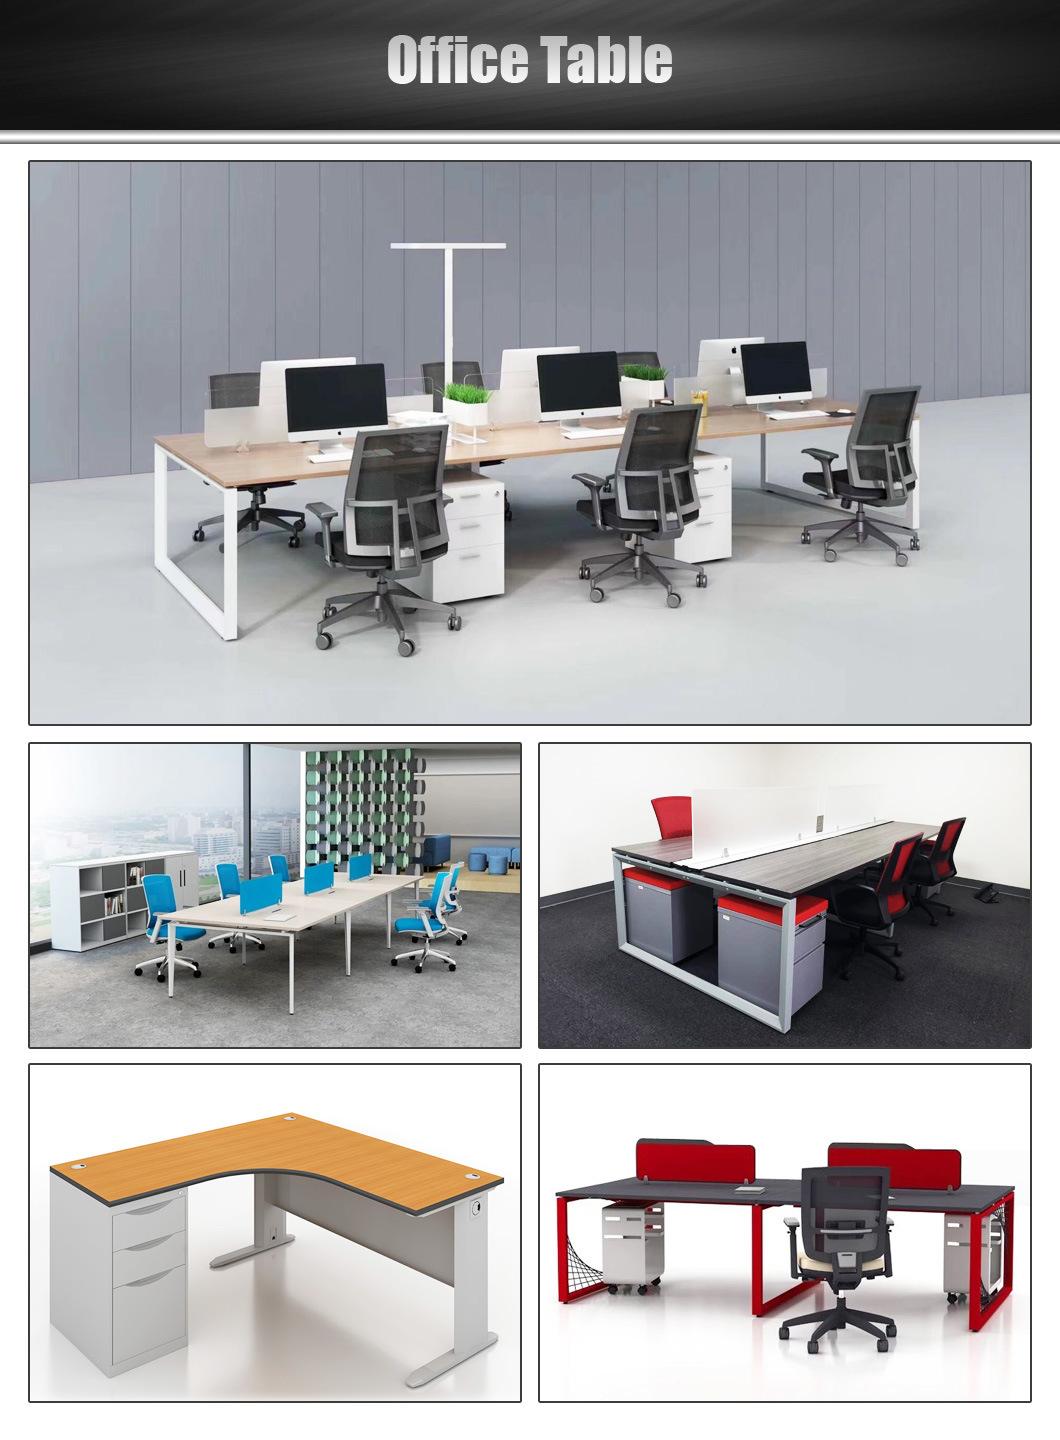 China Modern Office System Furniture with Office Desk Table and Portable Filing Cabinet